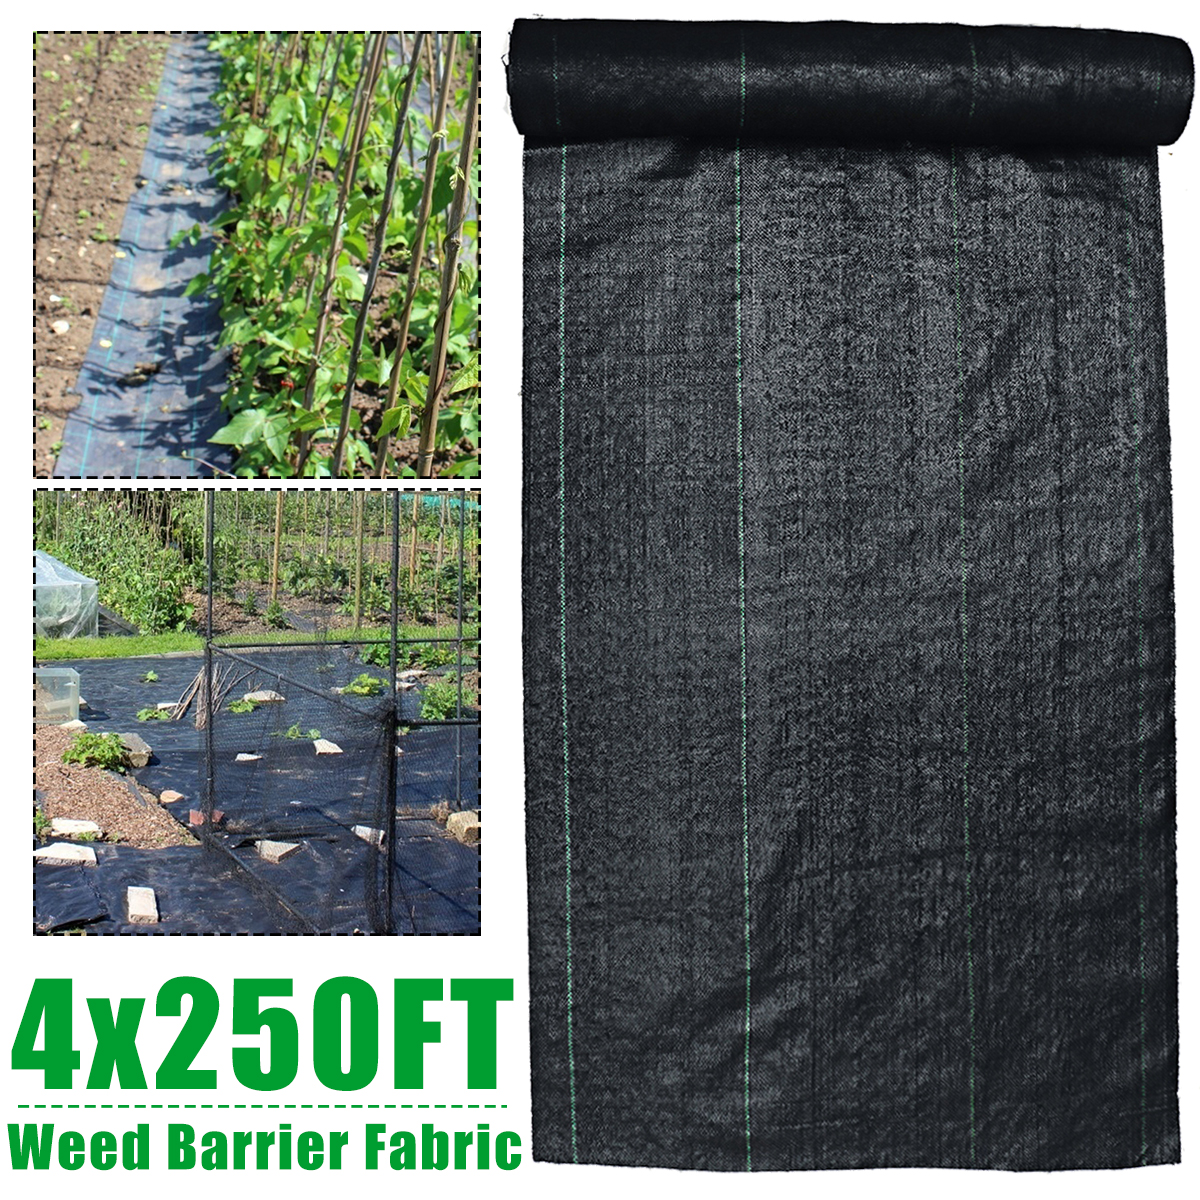 4-x-250ft-Weed-Barrier-Garden-Landscape-Fabric-Durable-Weed-Block-Ground-Cloth-Cover-Agriculture-Gre-1742484-1